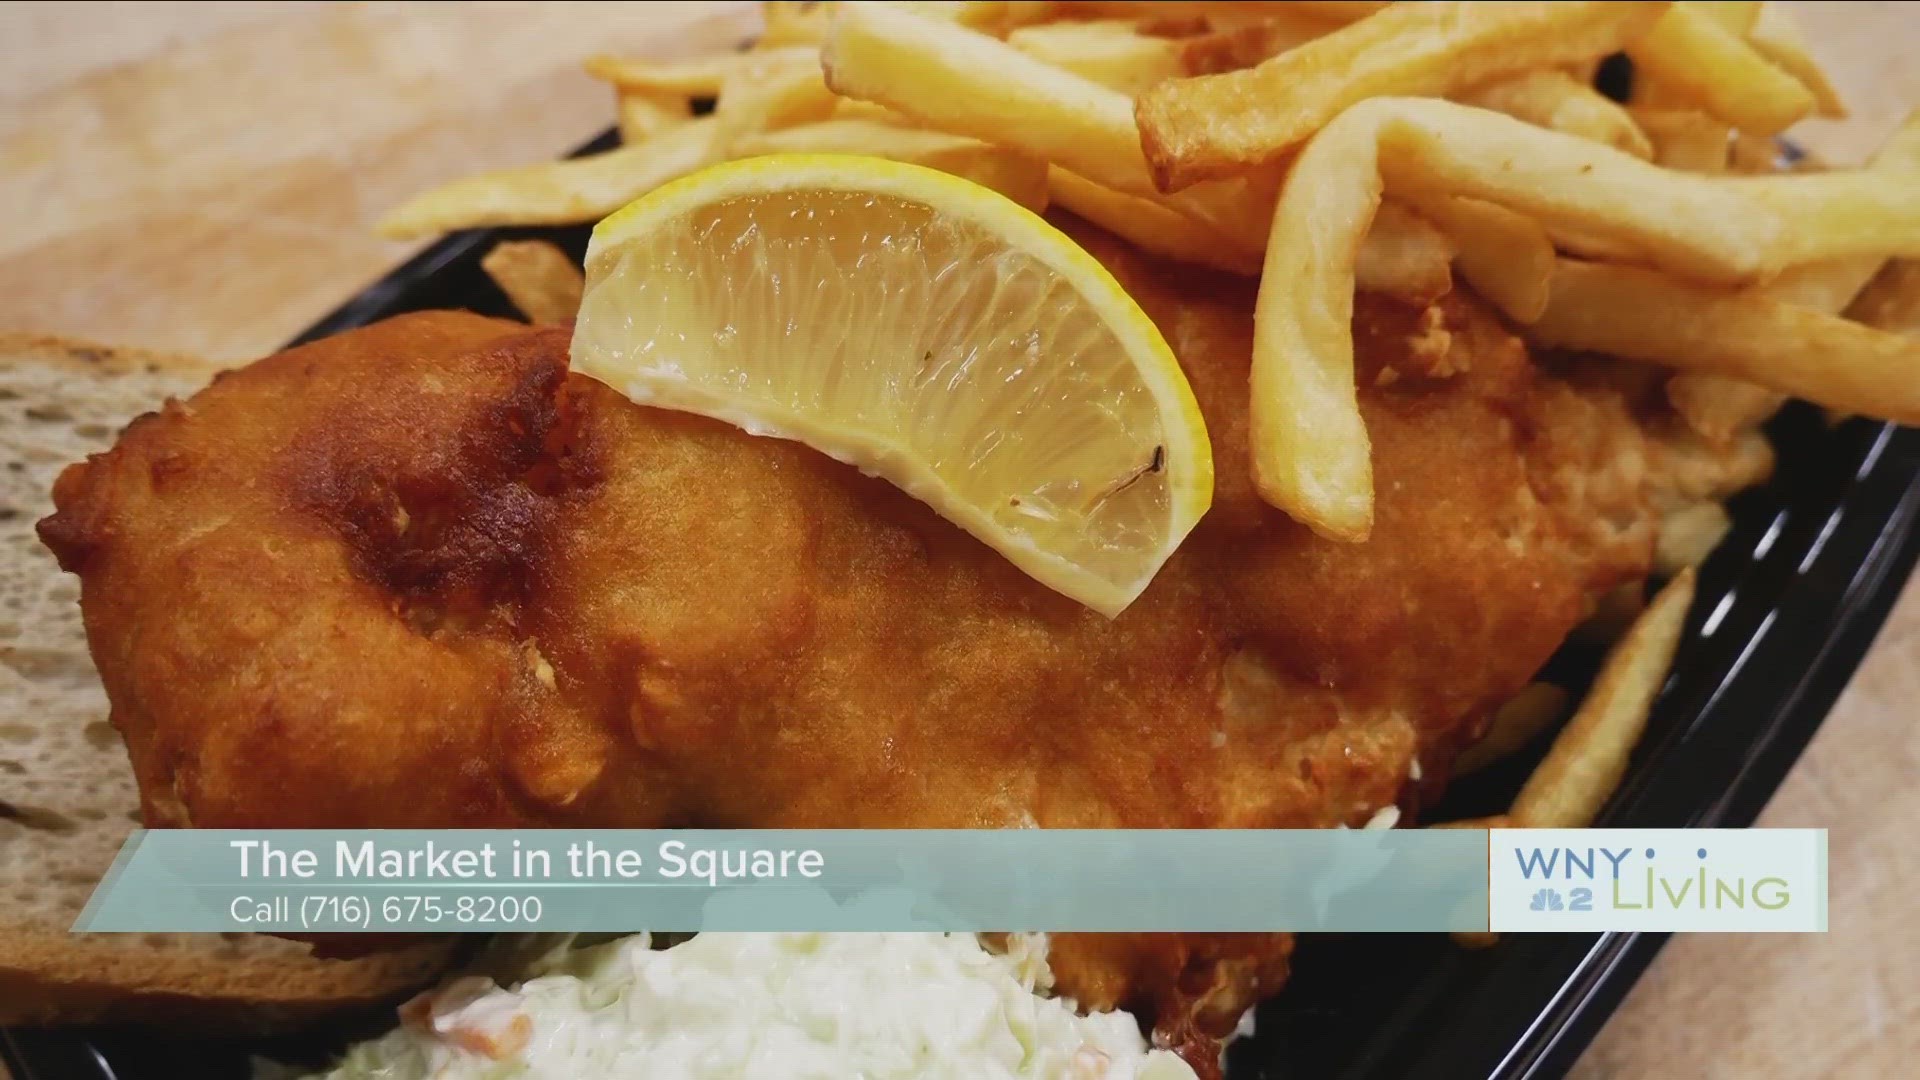 WNY Living - March 11th Market In The Square - THIS VIDEO IS SPONSORED BY MARKET IN THE SQUARE